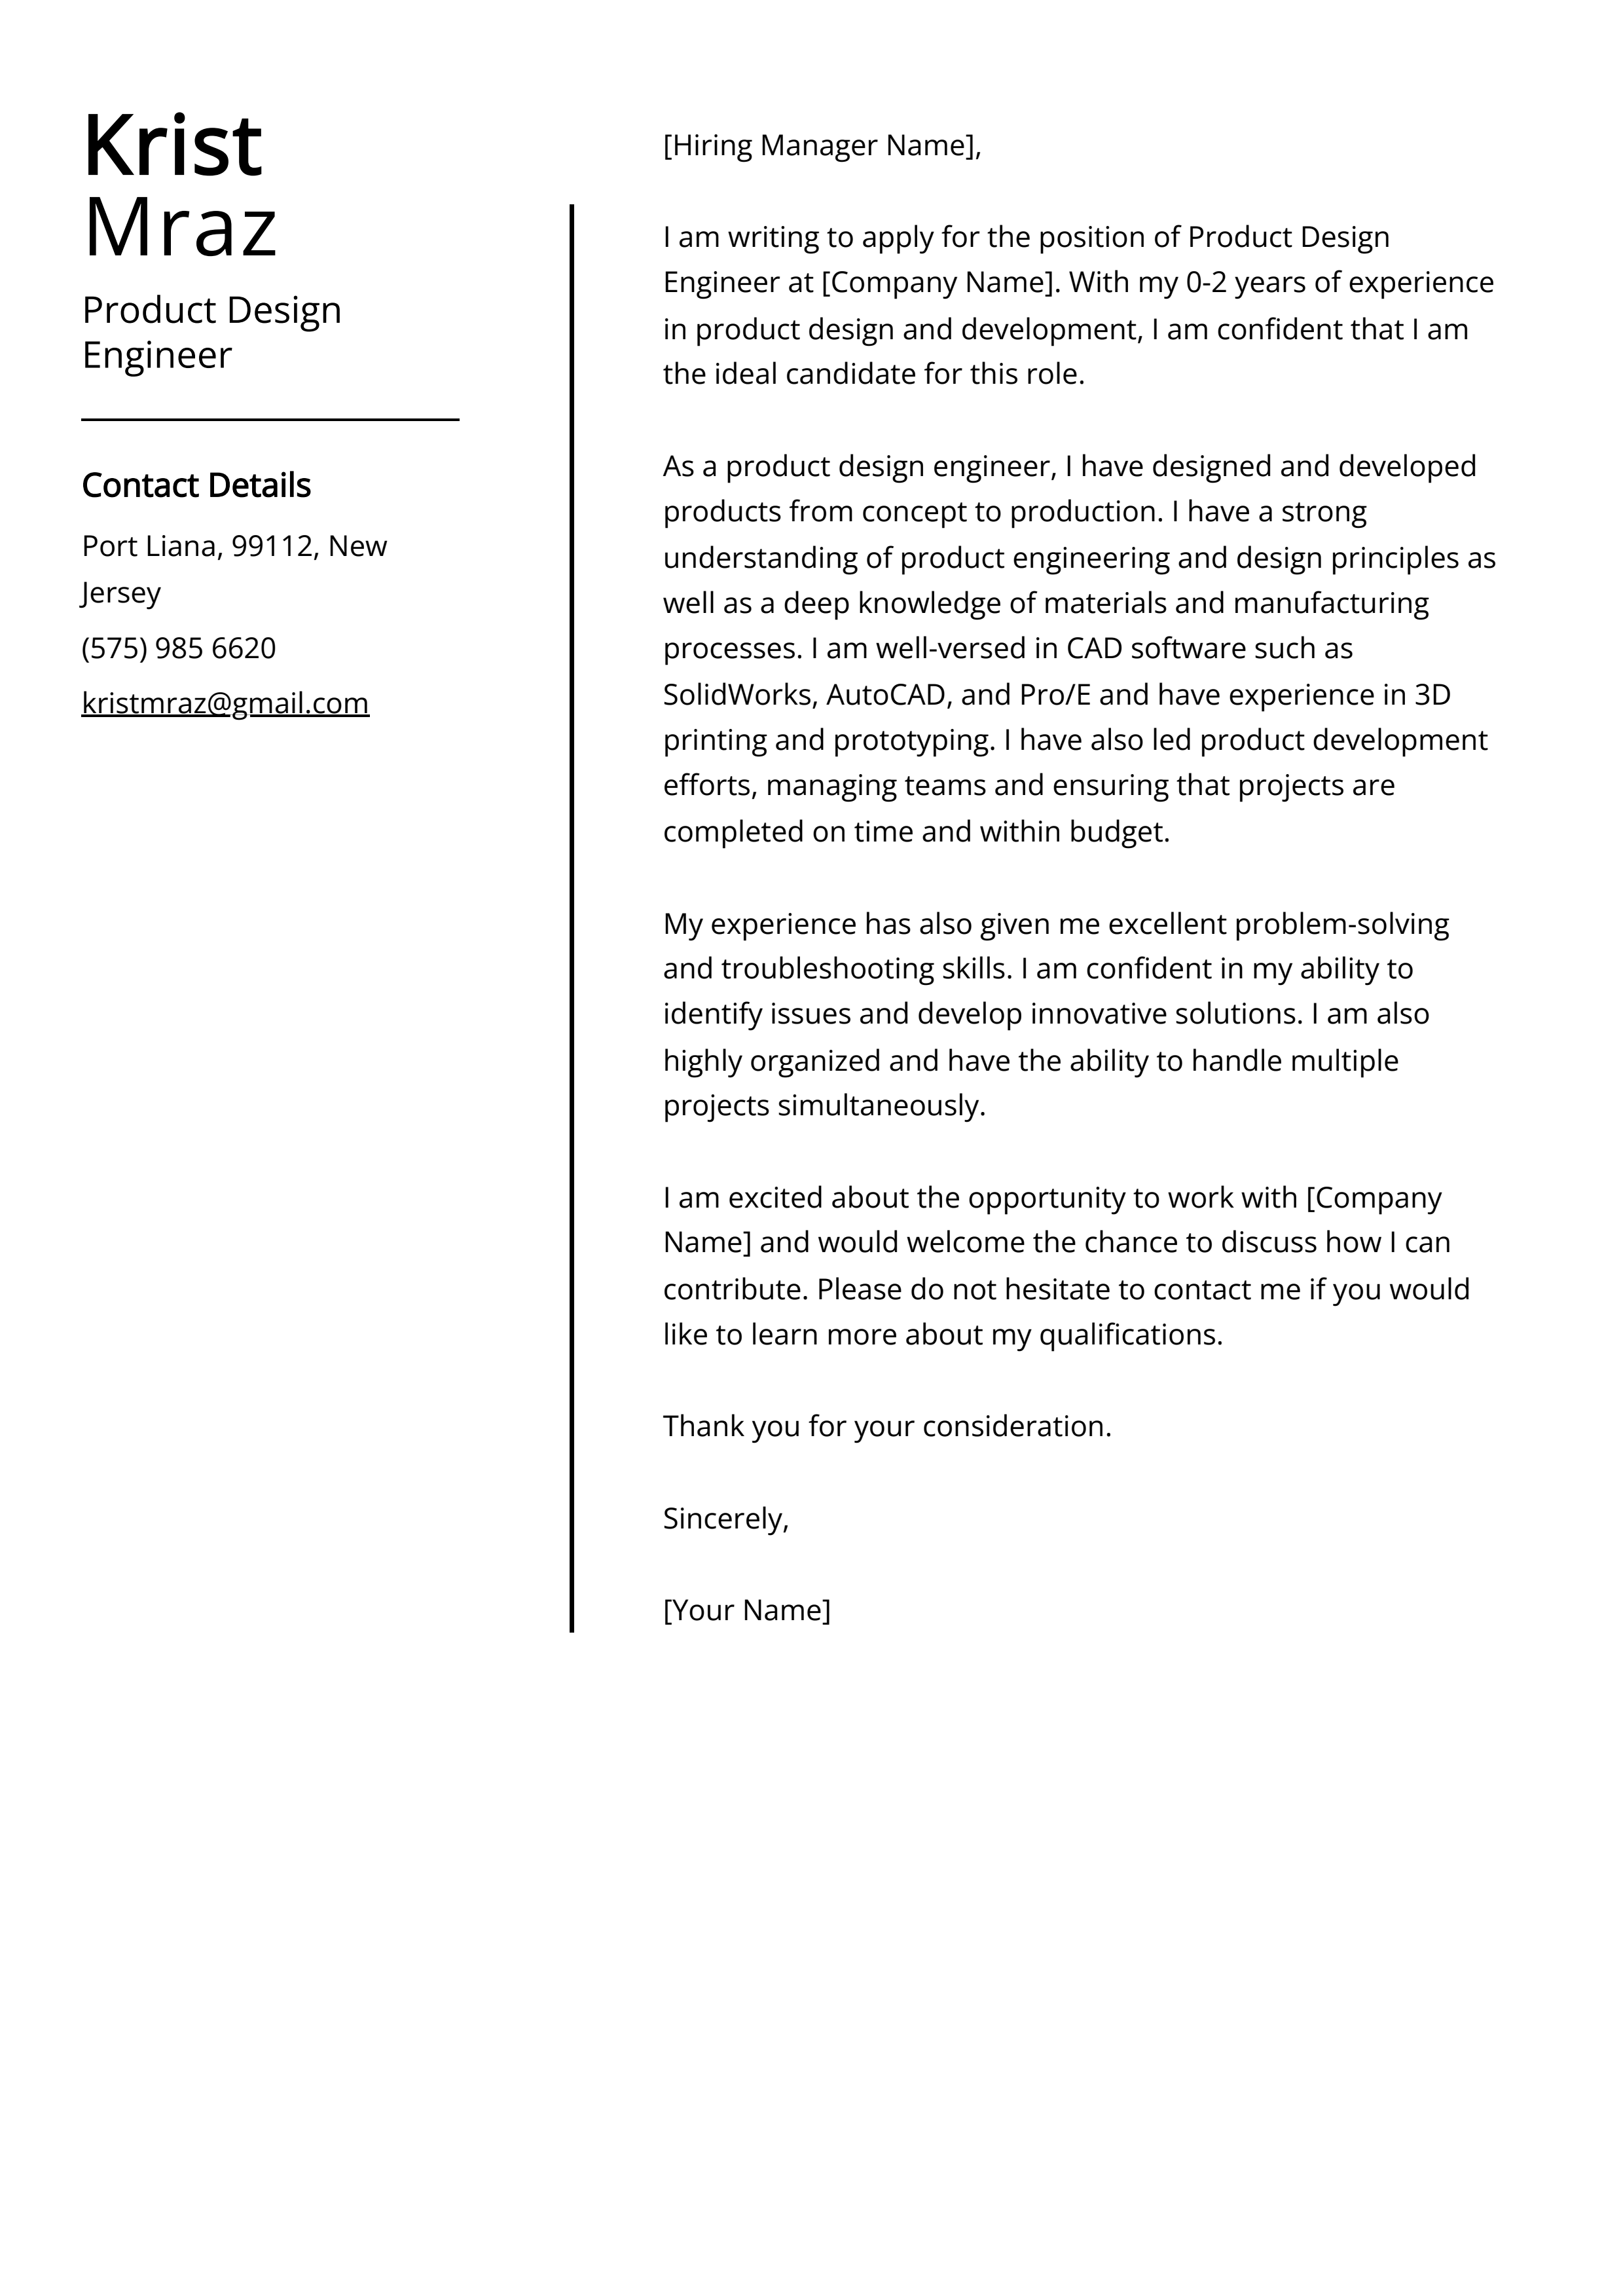 Product Design Engineer Cover Letter Example